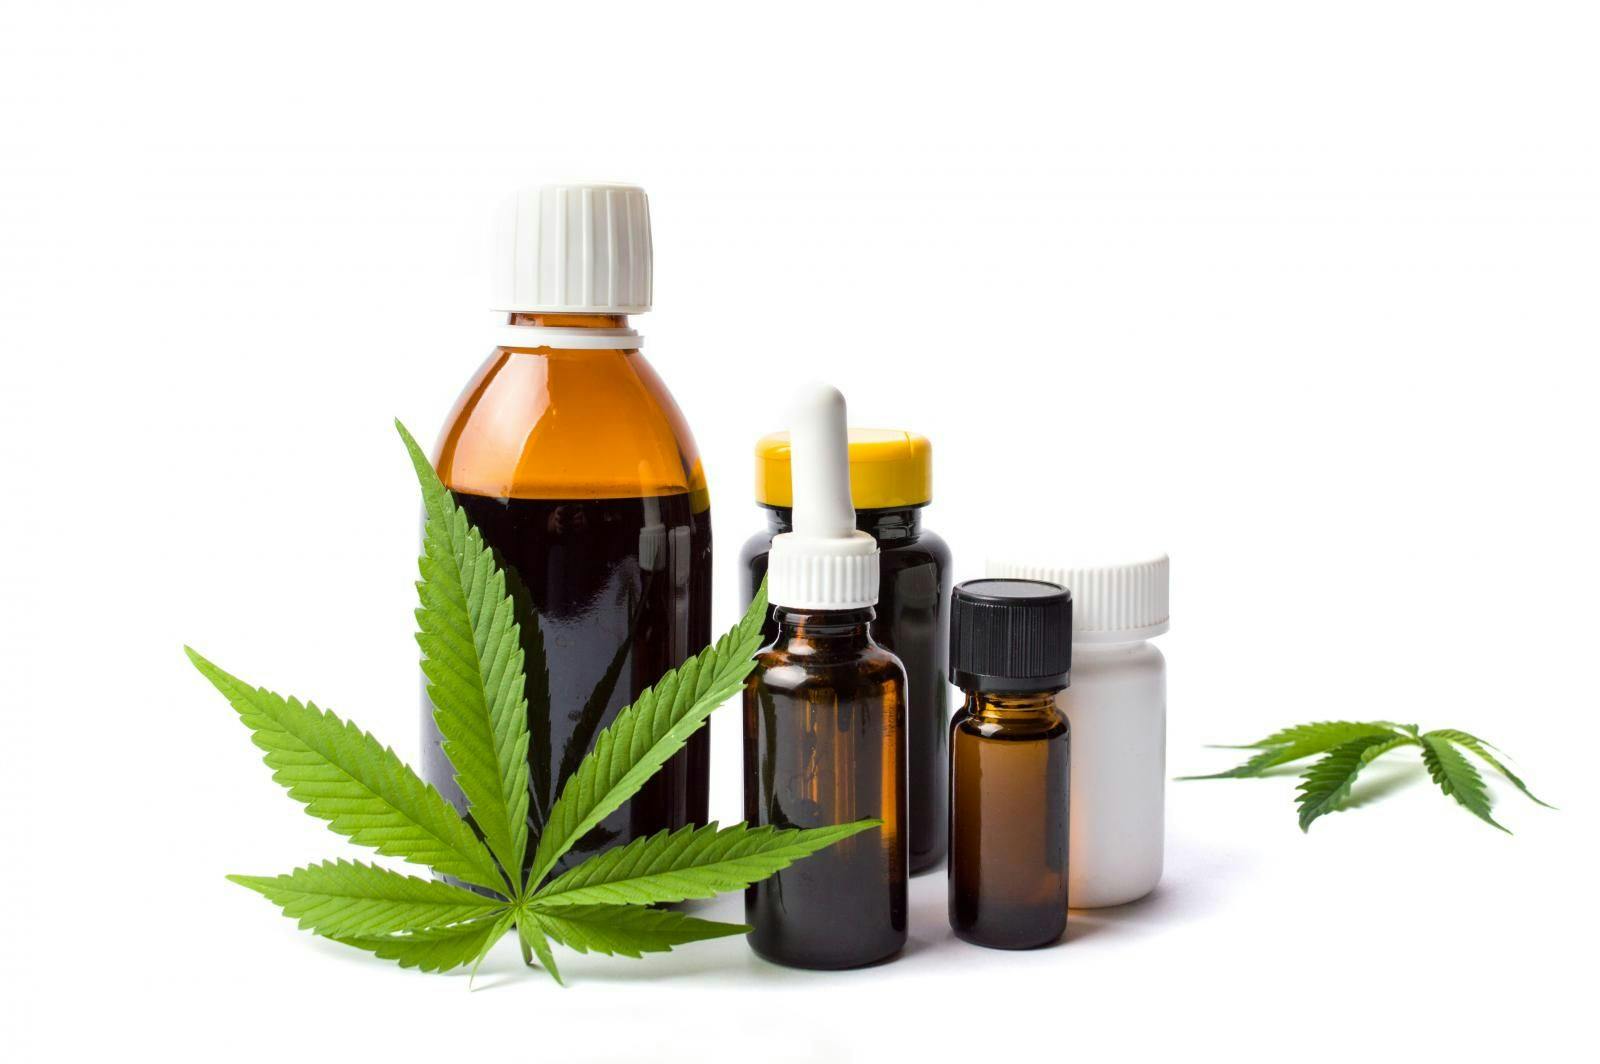 Study: Health Care Providers Need More Knowledge About Medicinal Cannabis Use in Oncology